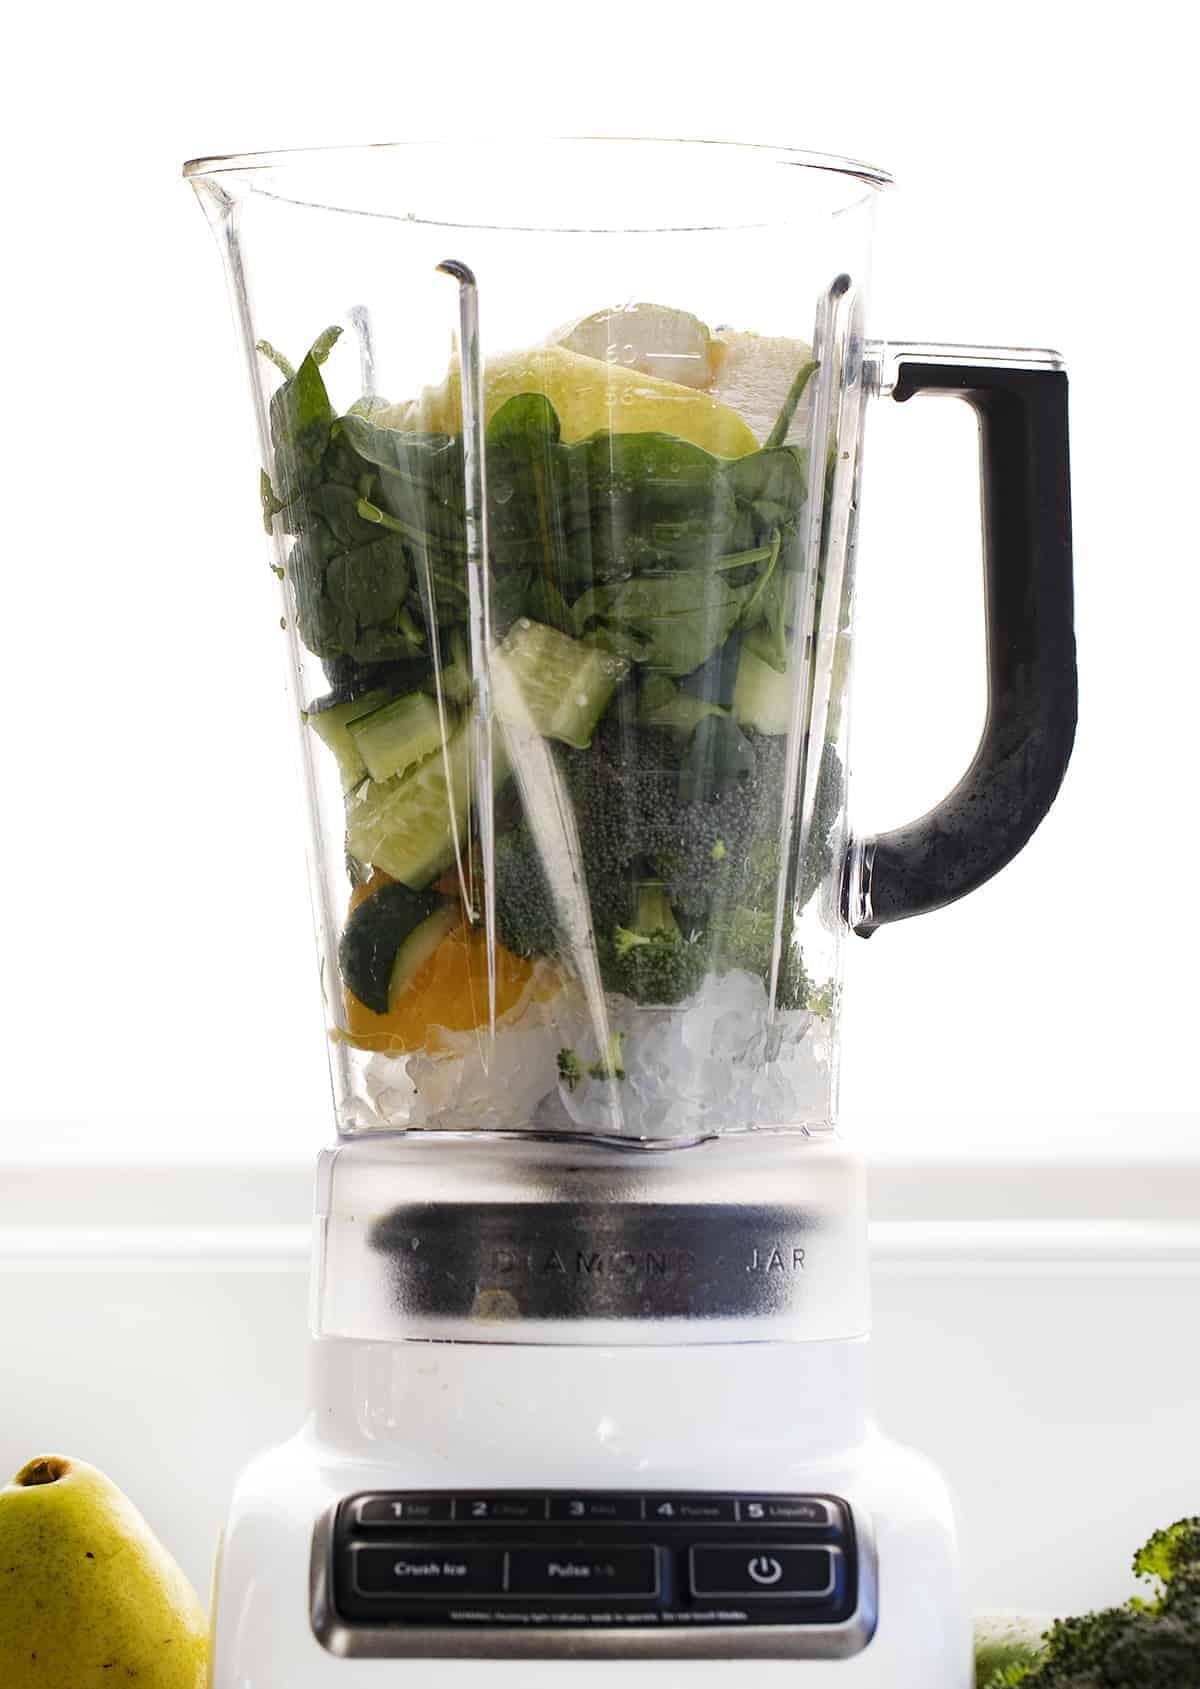 Ingredients for Green Smoothie in a Blender